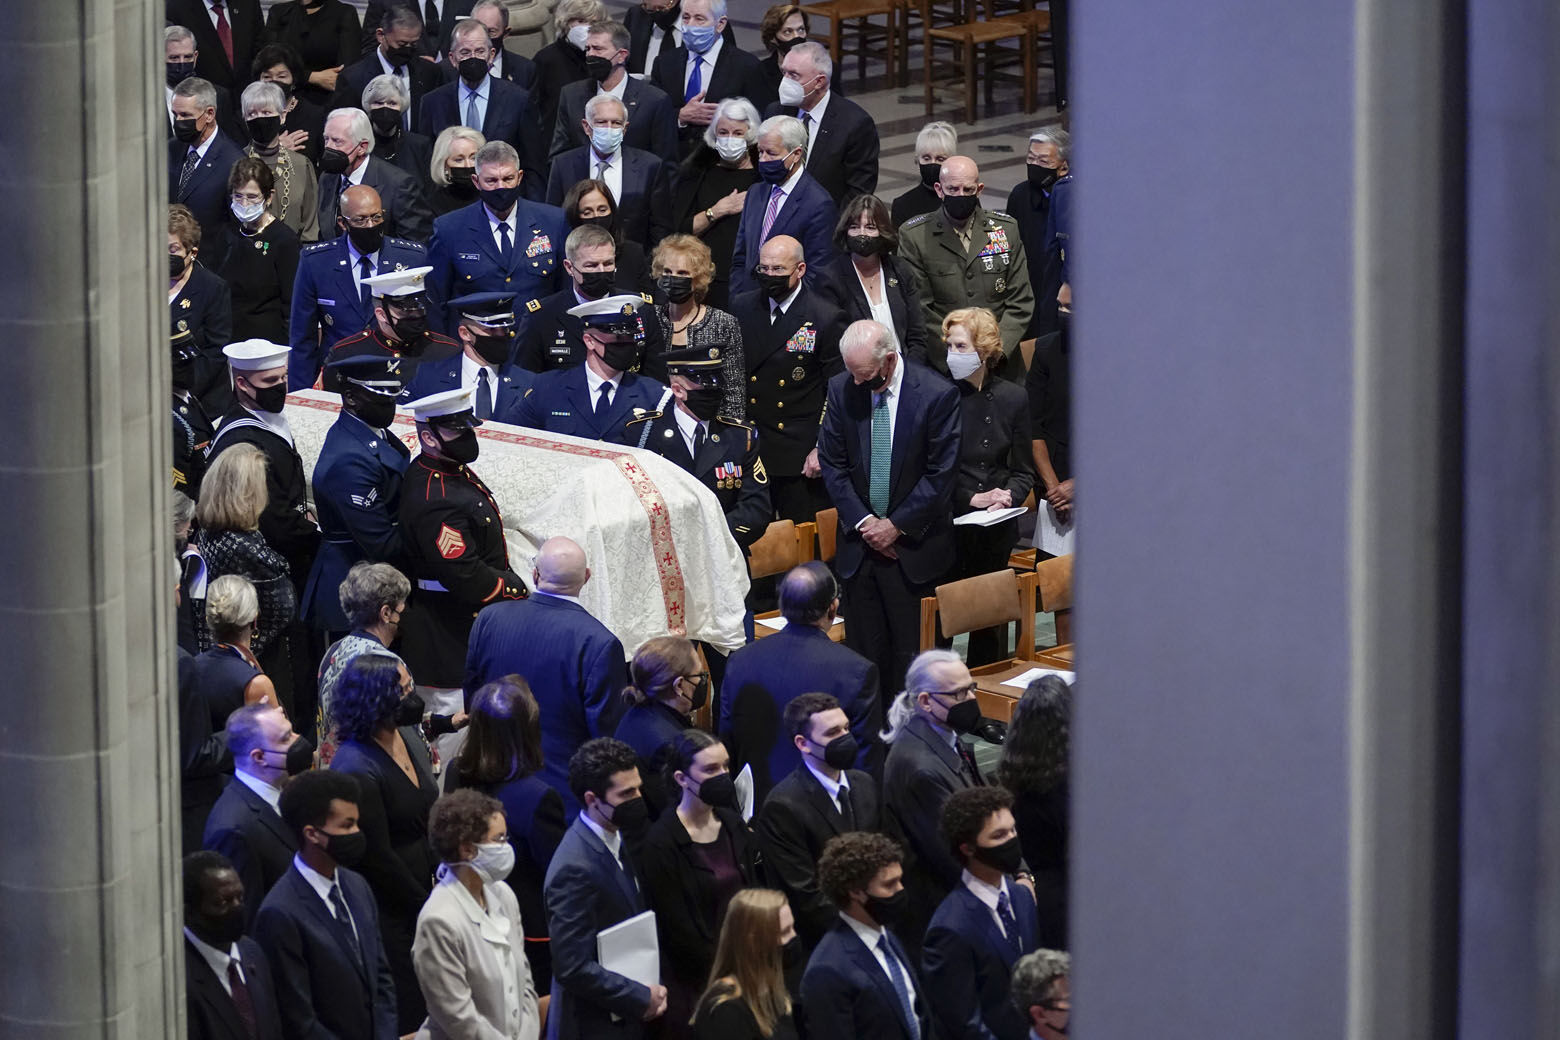 President Joe Biden watches as the casket of former Secretary of State Colin Powell is carried during a funeral service at the Washington National Cathedral, in Washington, Friday, Nov. 5, 2021. (AP Photo/Evan Vucci)